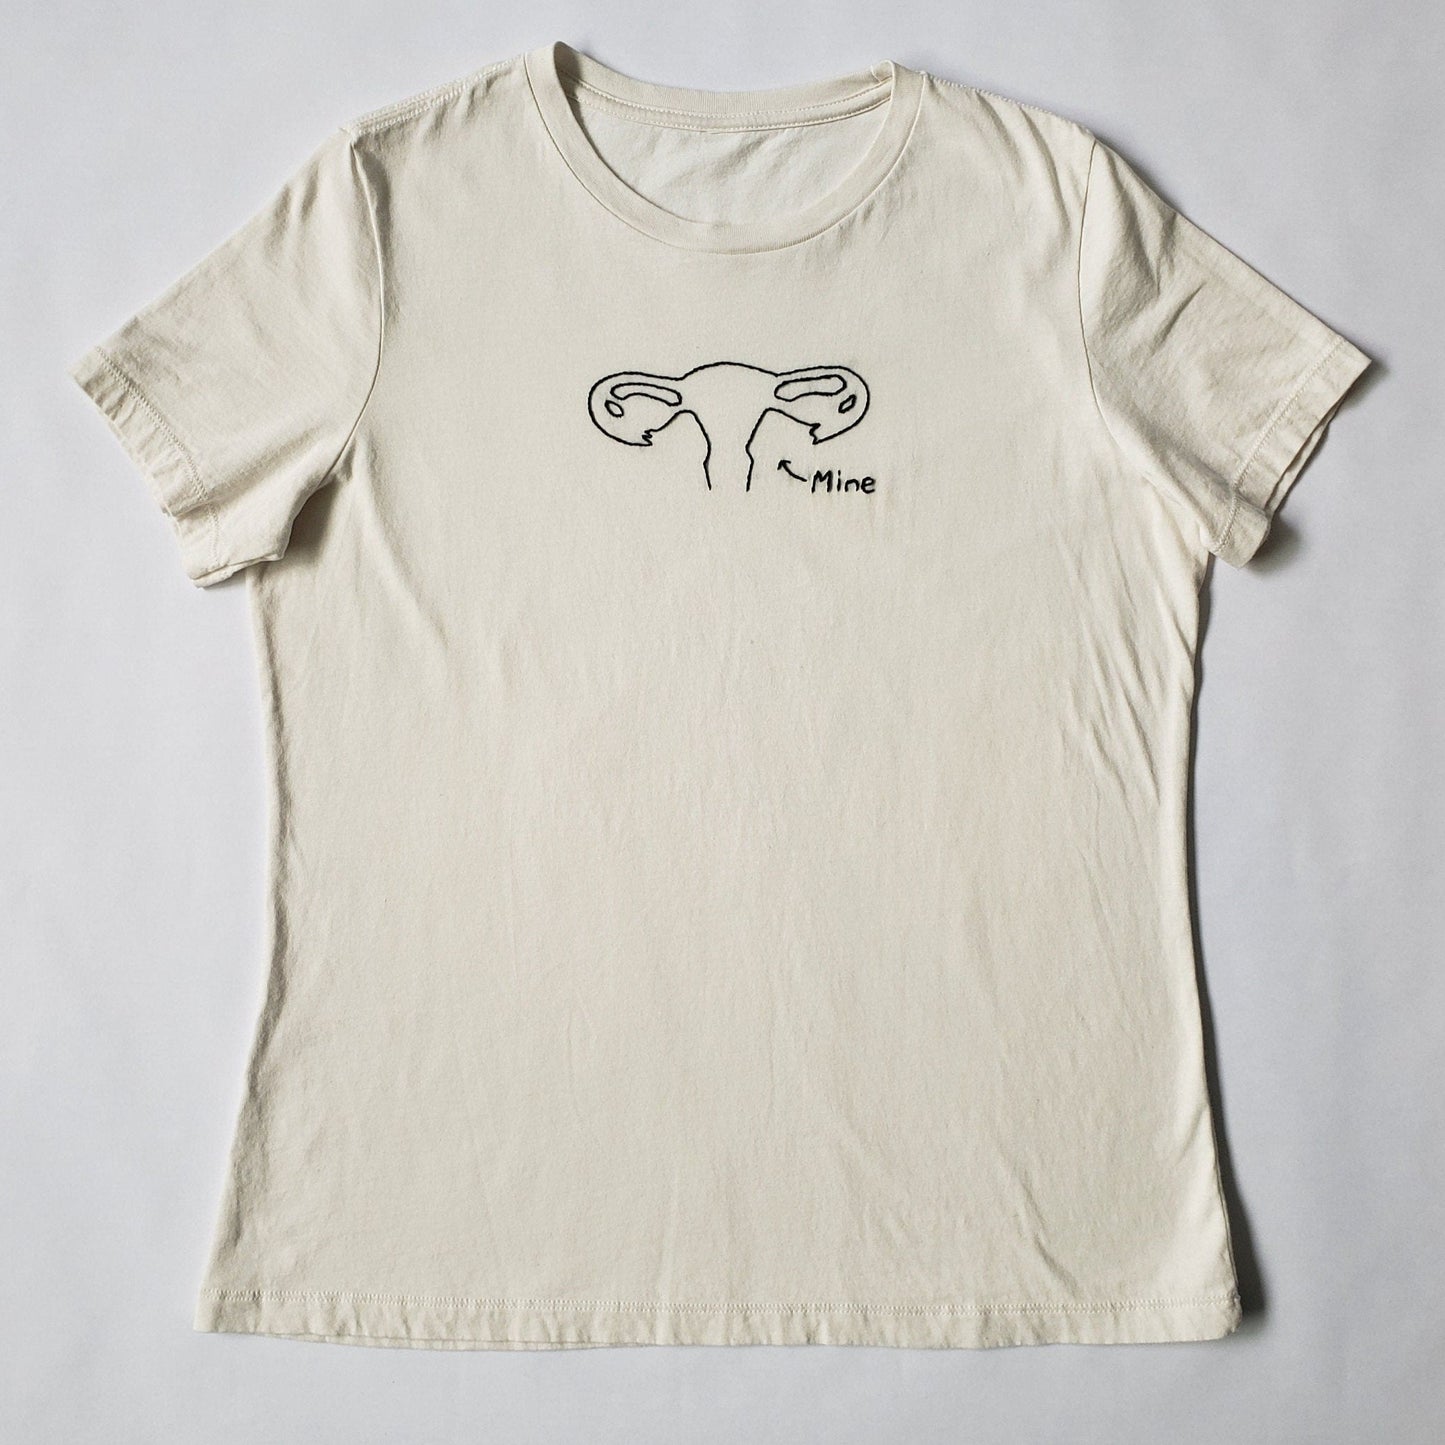 A crewneck cream tee laid flat on a white background. The shirt has a uterus hand embroidered in a vine stitch, and "mine" and a small arrow embroidered in a backstitch. All art is done in black. It is all quite minimal, just the outline of the organ.